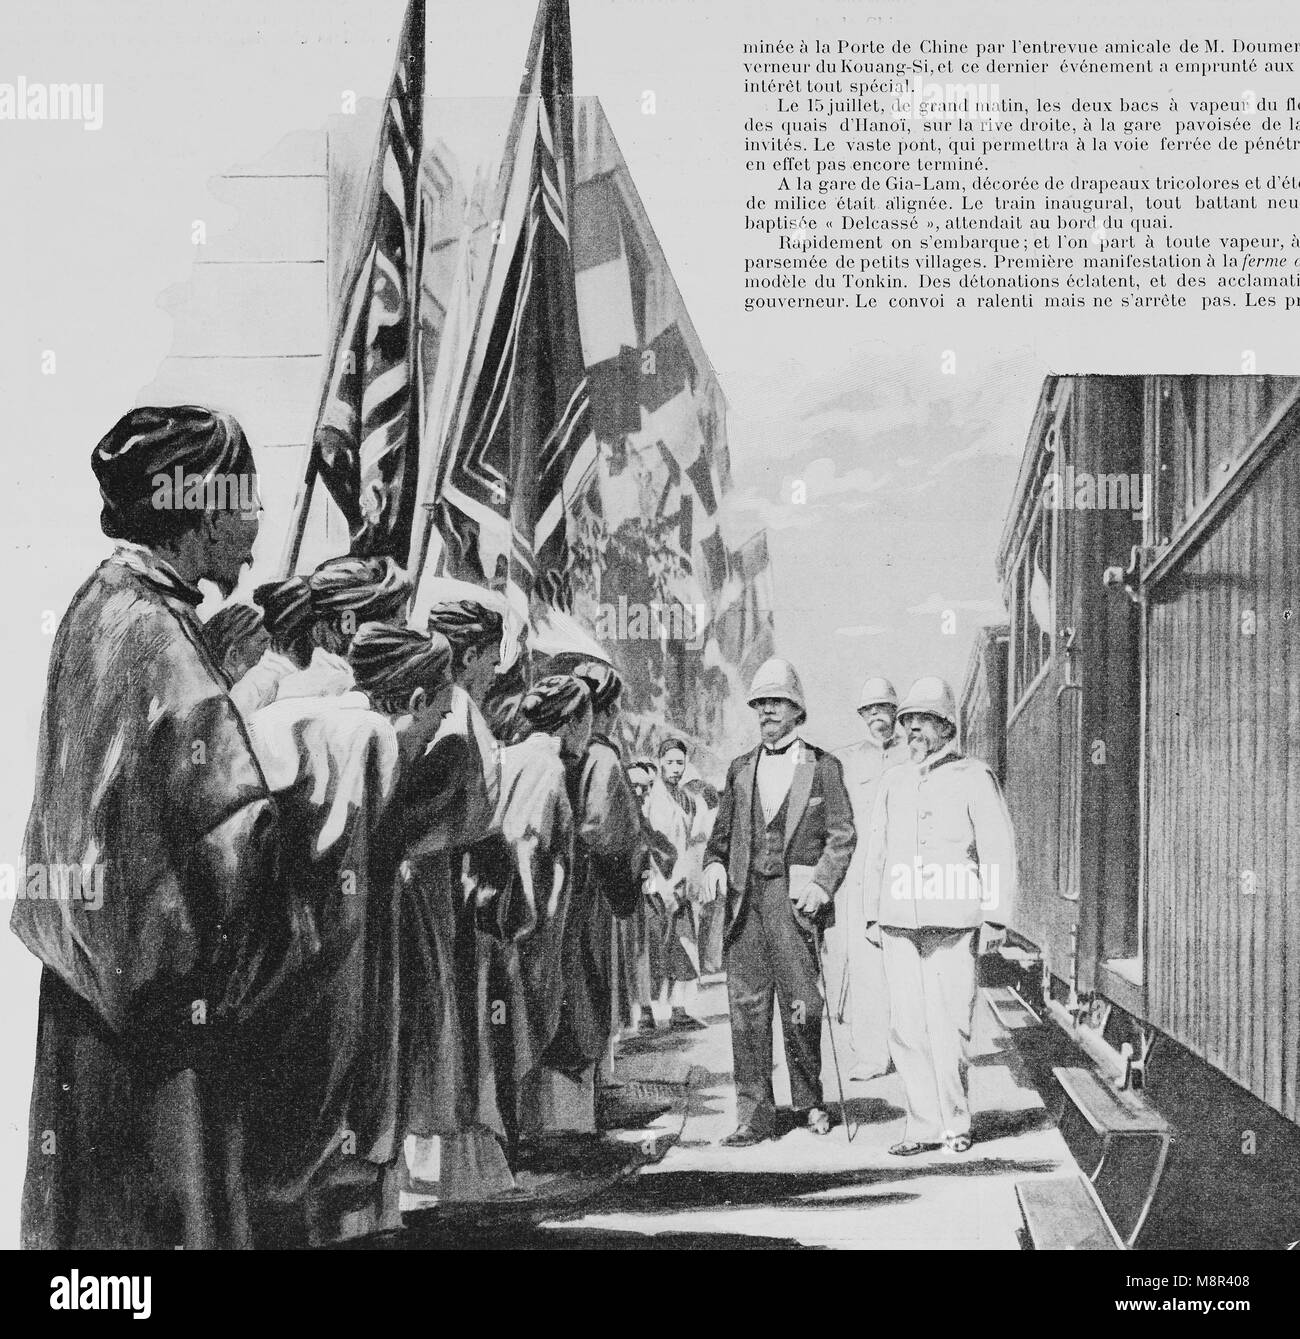 Inauguration of the railway constructed by the France between Hanoi and China in 1900, Picture from the French weekly newspaper l'Illustration, 22d September 1900 Stock Photo